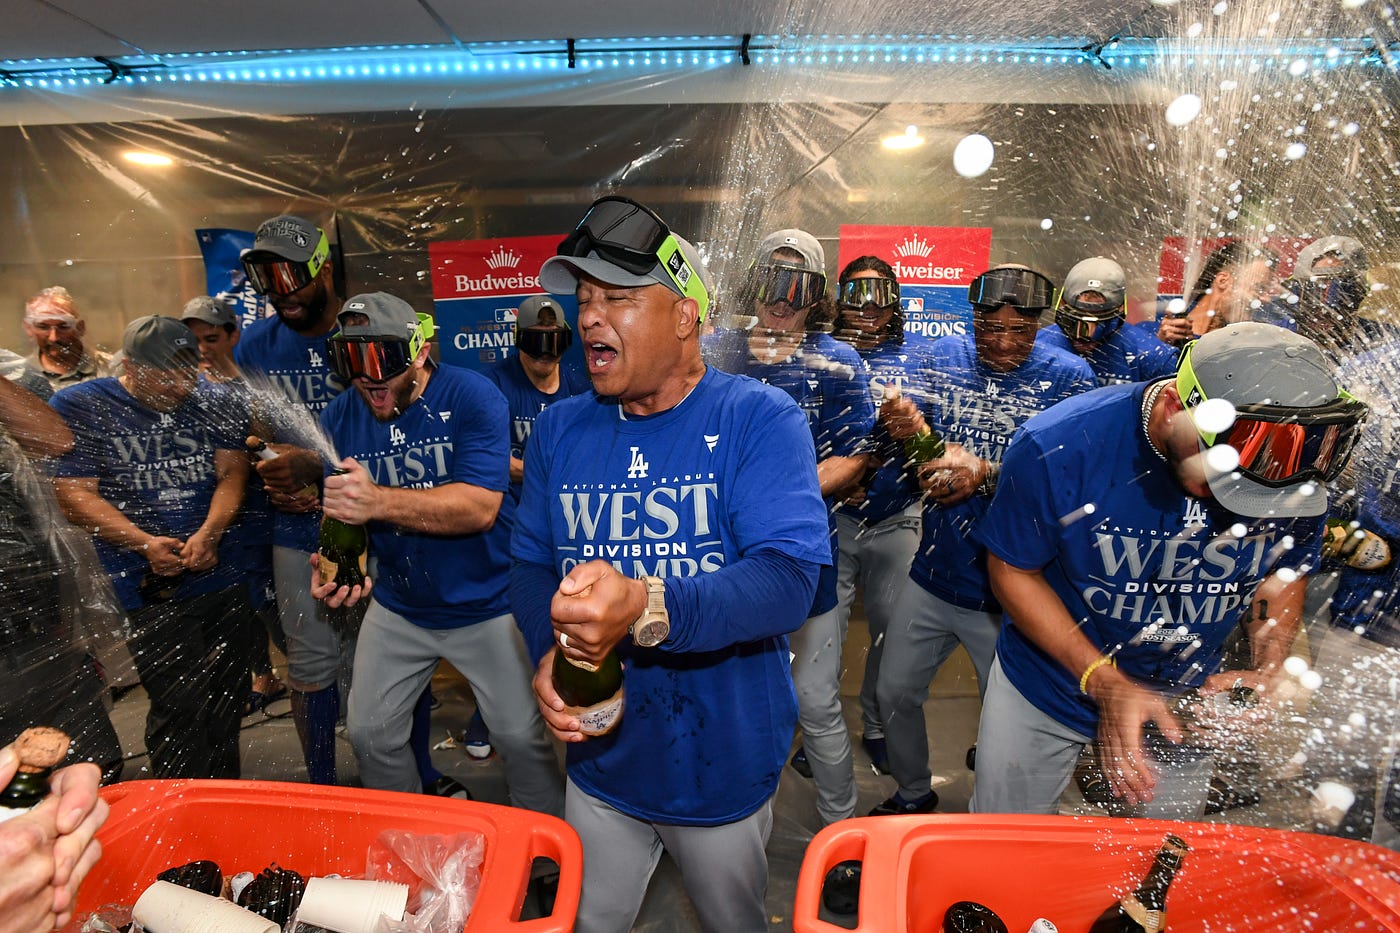 Manager masterclass: Dave Roberts' stamp is all over 2023 NL West  championship team, by Cary Osborne, Sep, 2023